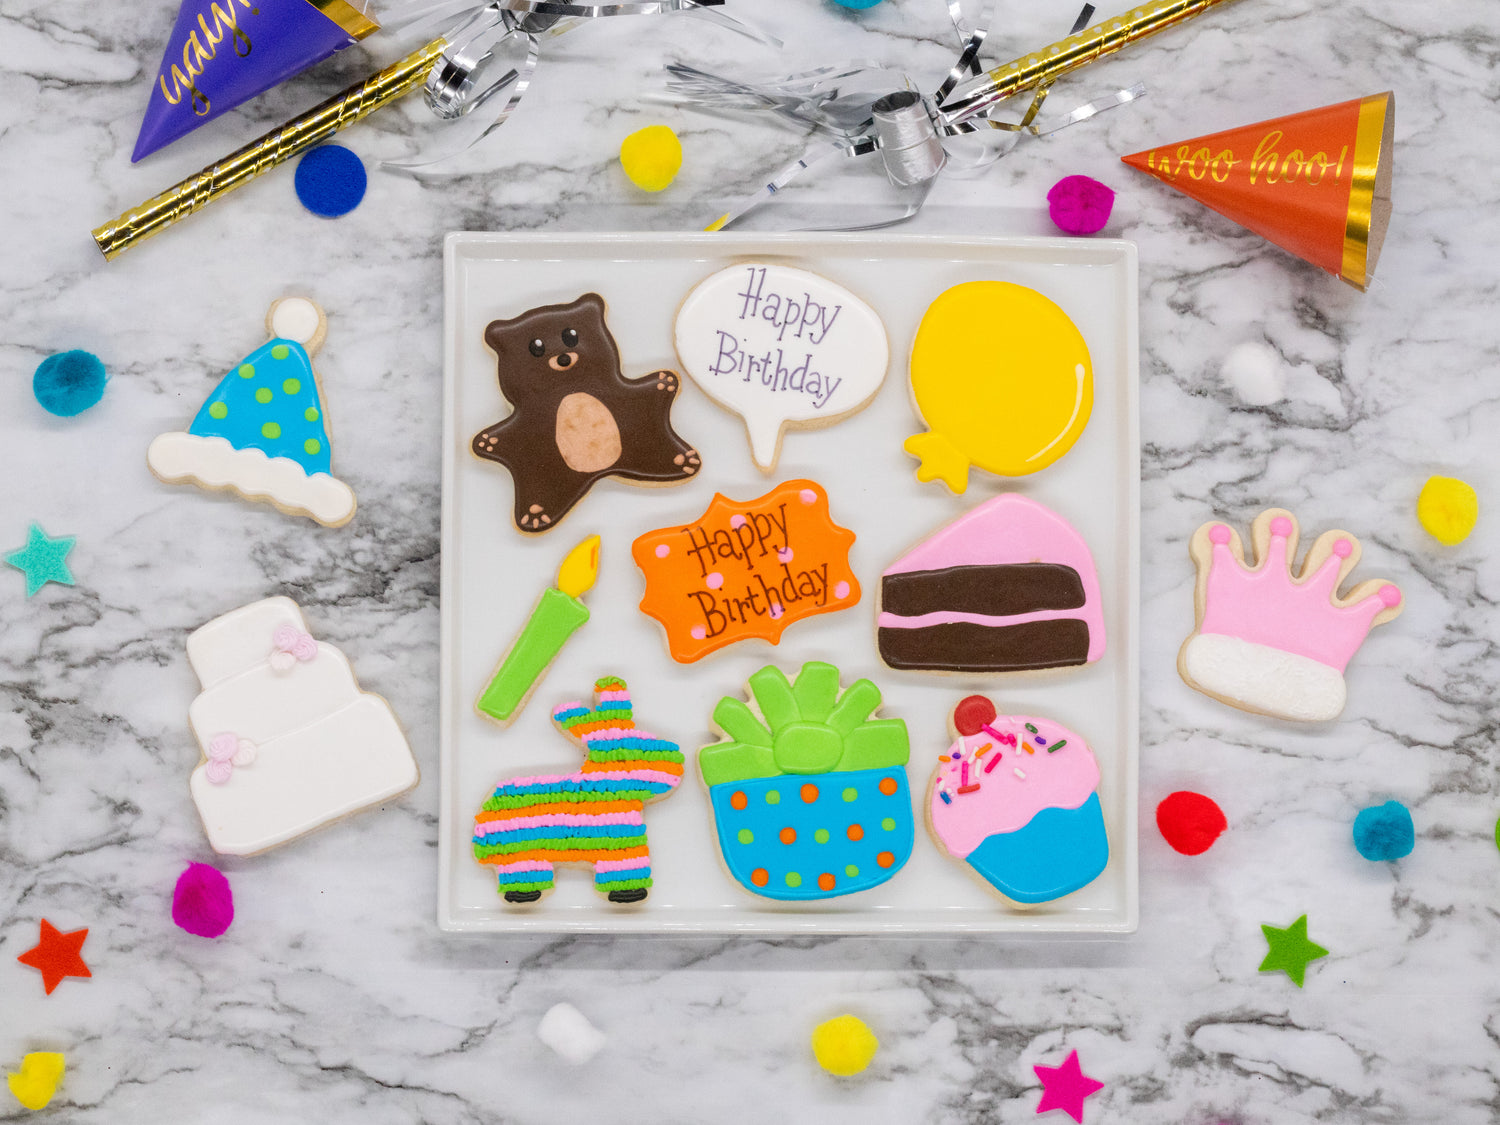 Lifestyle photo containing iced and decorated  Party hat, balloon, conversation bubble, donkey piñata,  cupcake, candle, cake slice, crown, teddy bear, happy birthday  plaque, gift and cake shaped cookies.